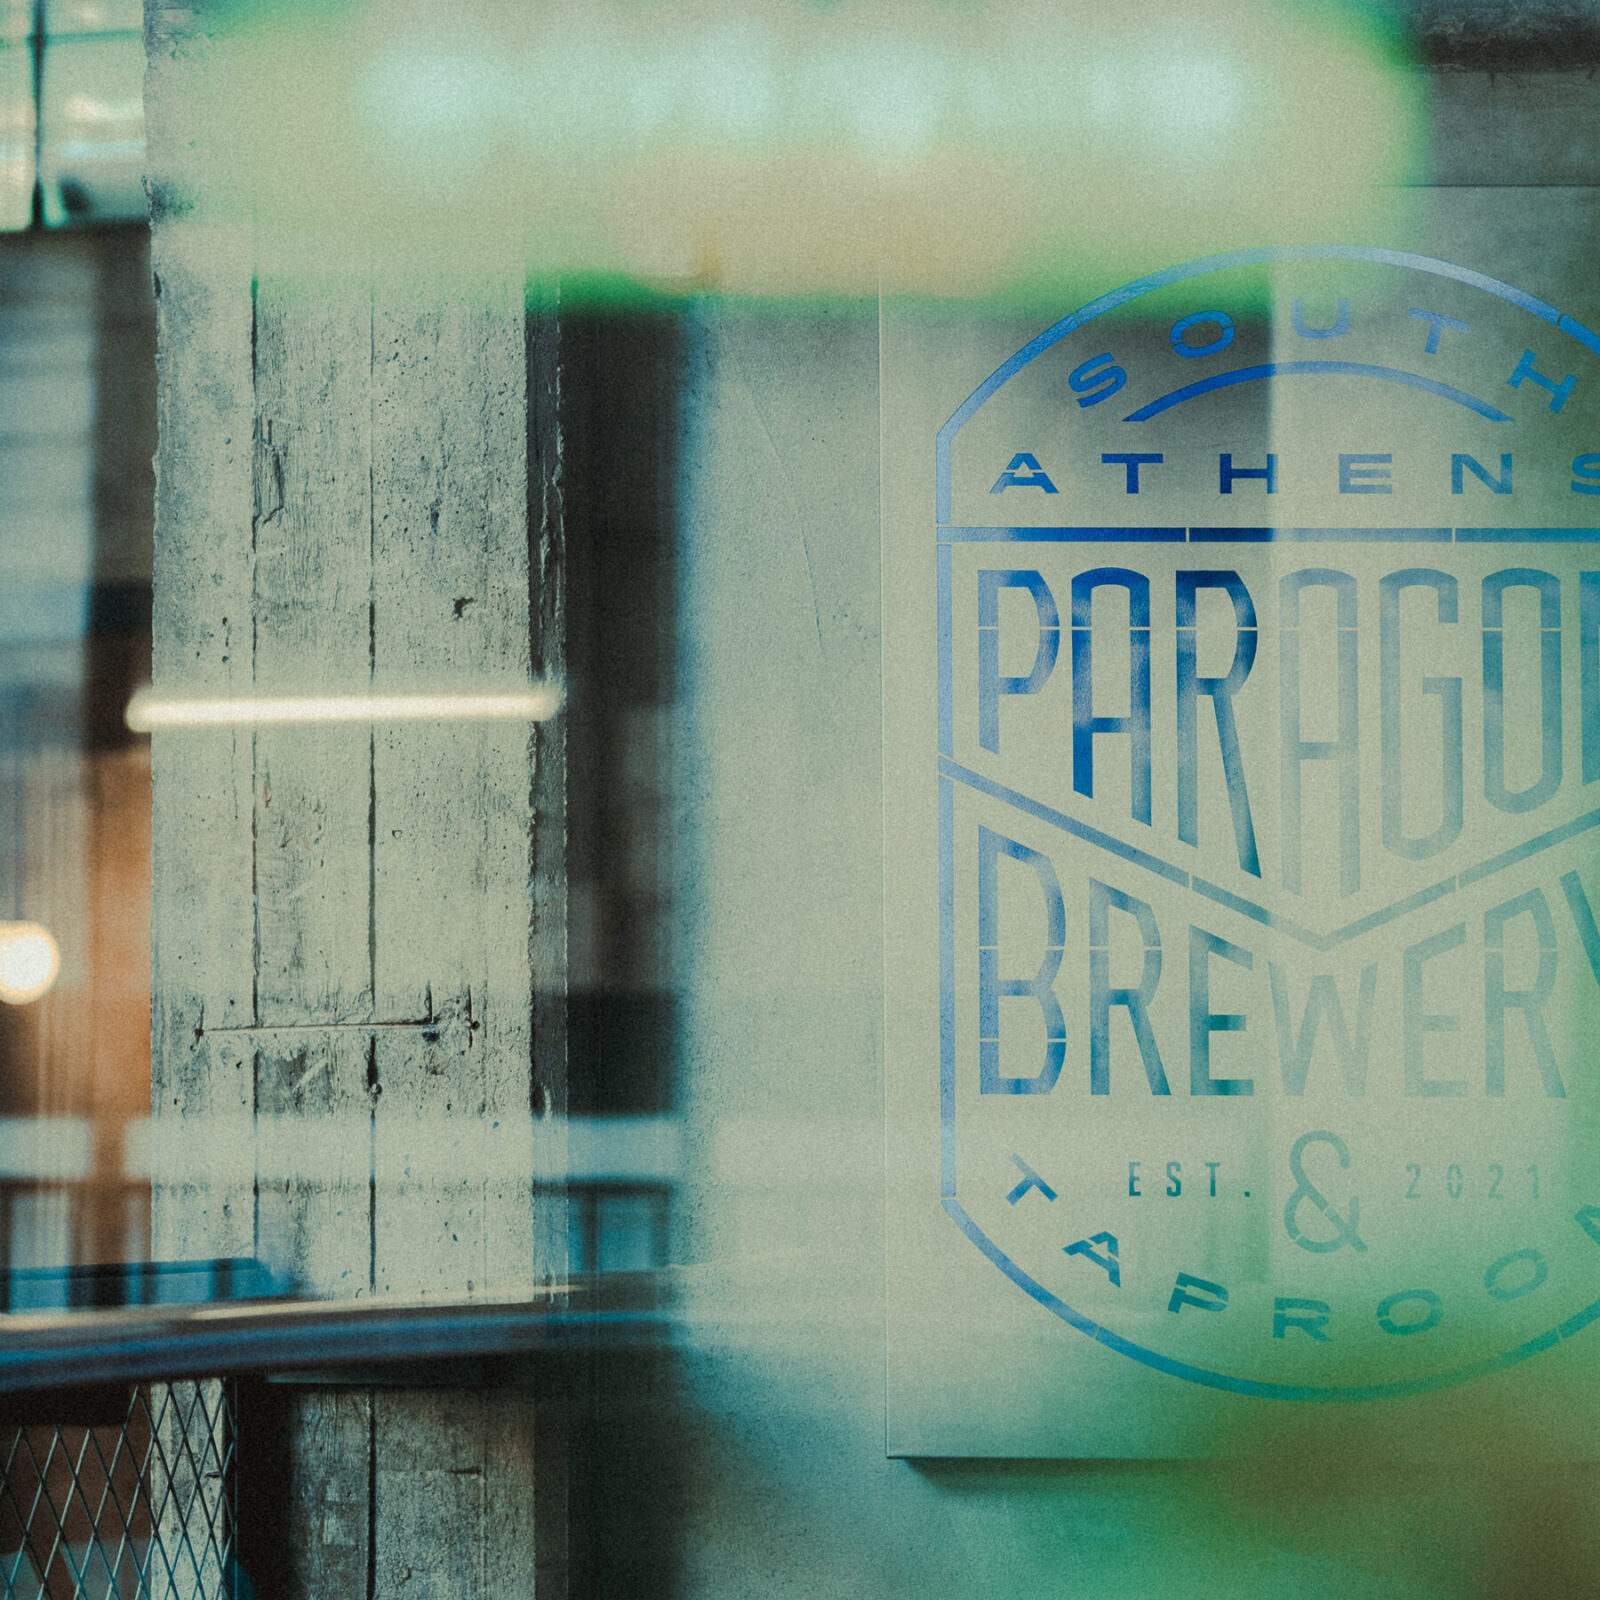 Archisearch Paragon Brewery & Taproom in Ilioupoli, Athens | Mado Samiou Architecture